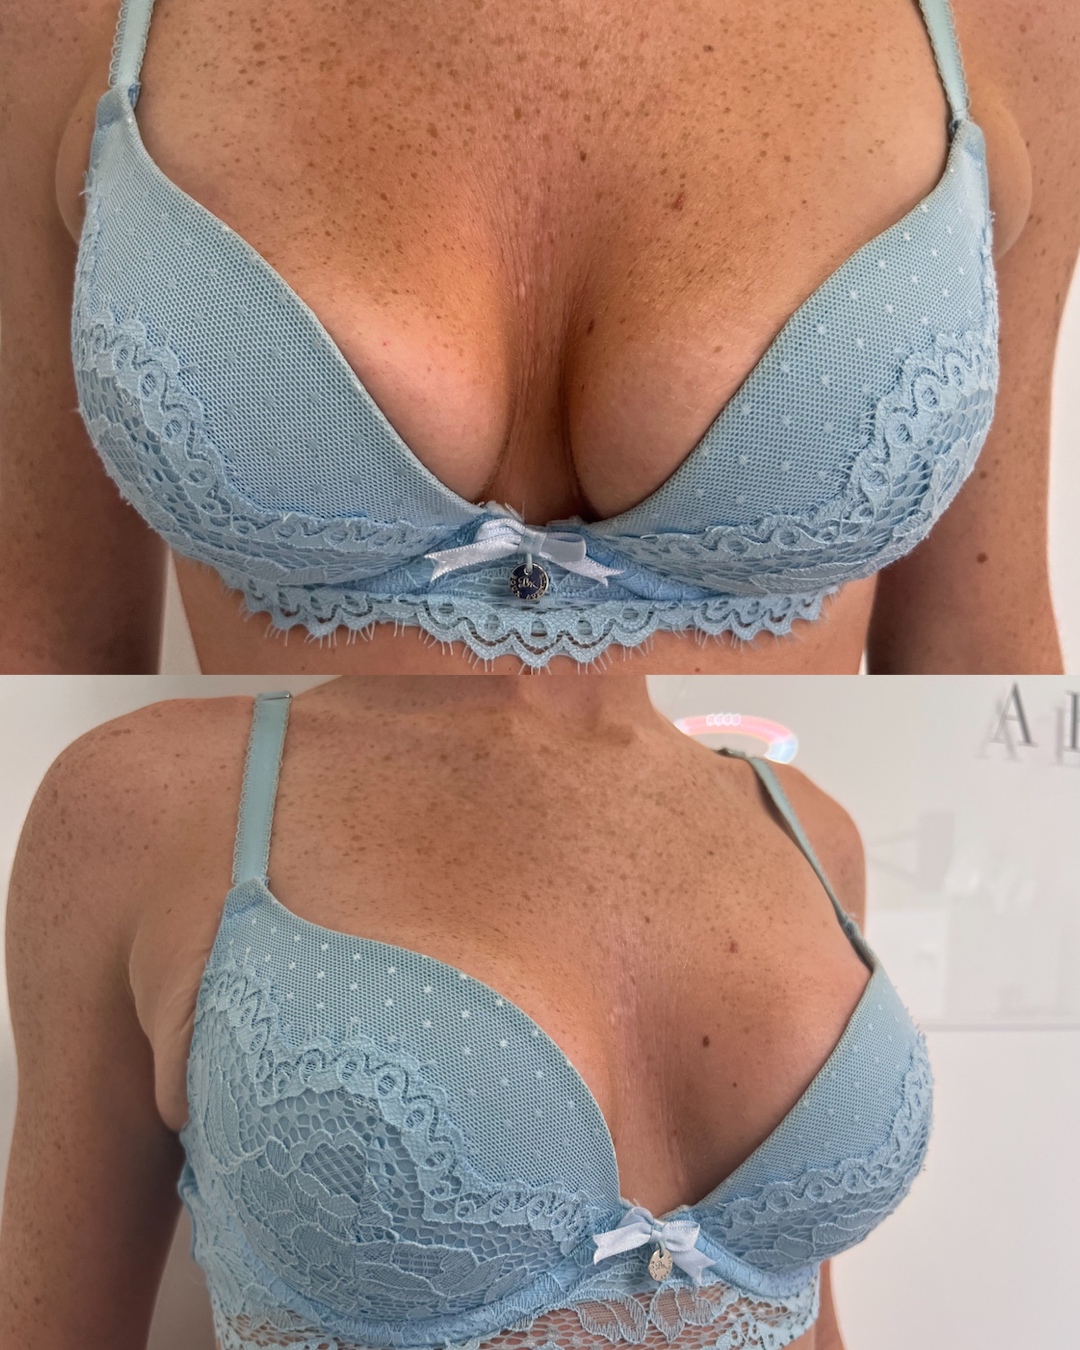 Cupping For Breast Growth: Does It Work? Why Do Women Try It?